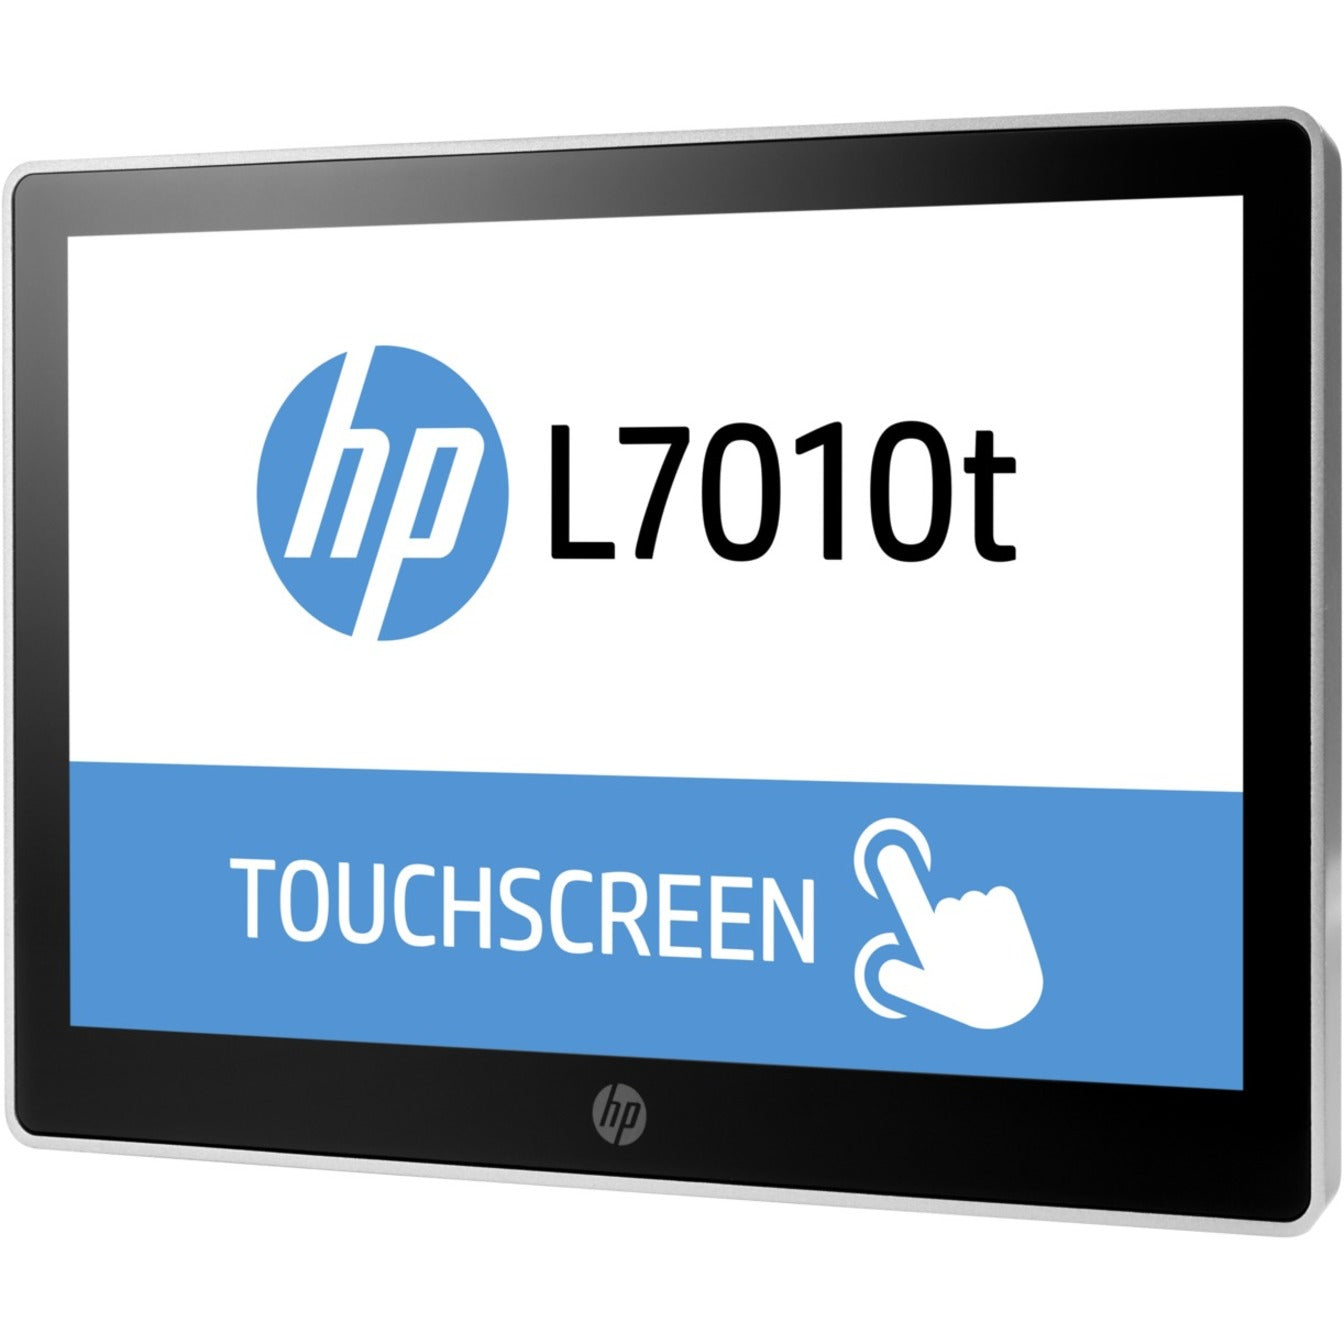 HP L7010t 10.1-inch Retail Touch Monitor, LED Backlight, 1280 x 800 Resolution, 16:9 Aspect Ratio